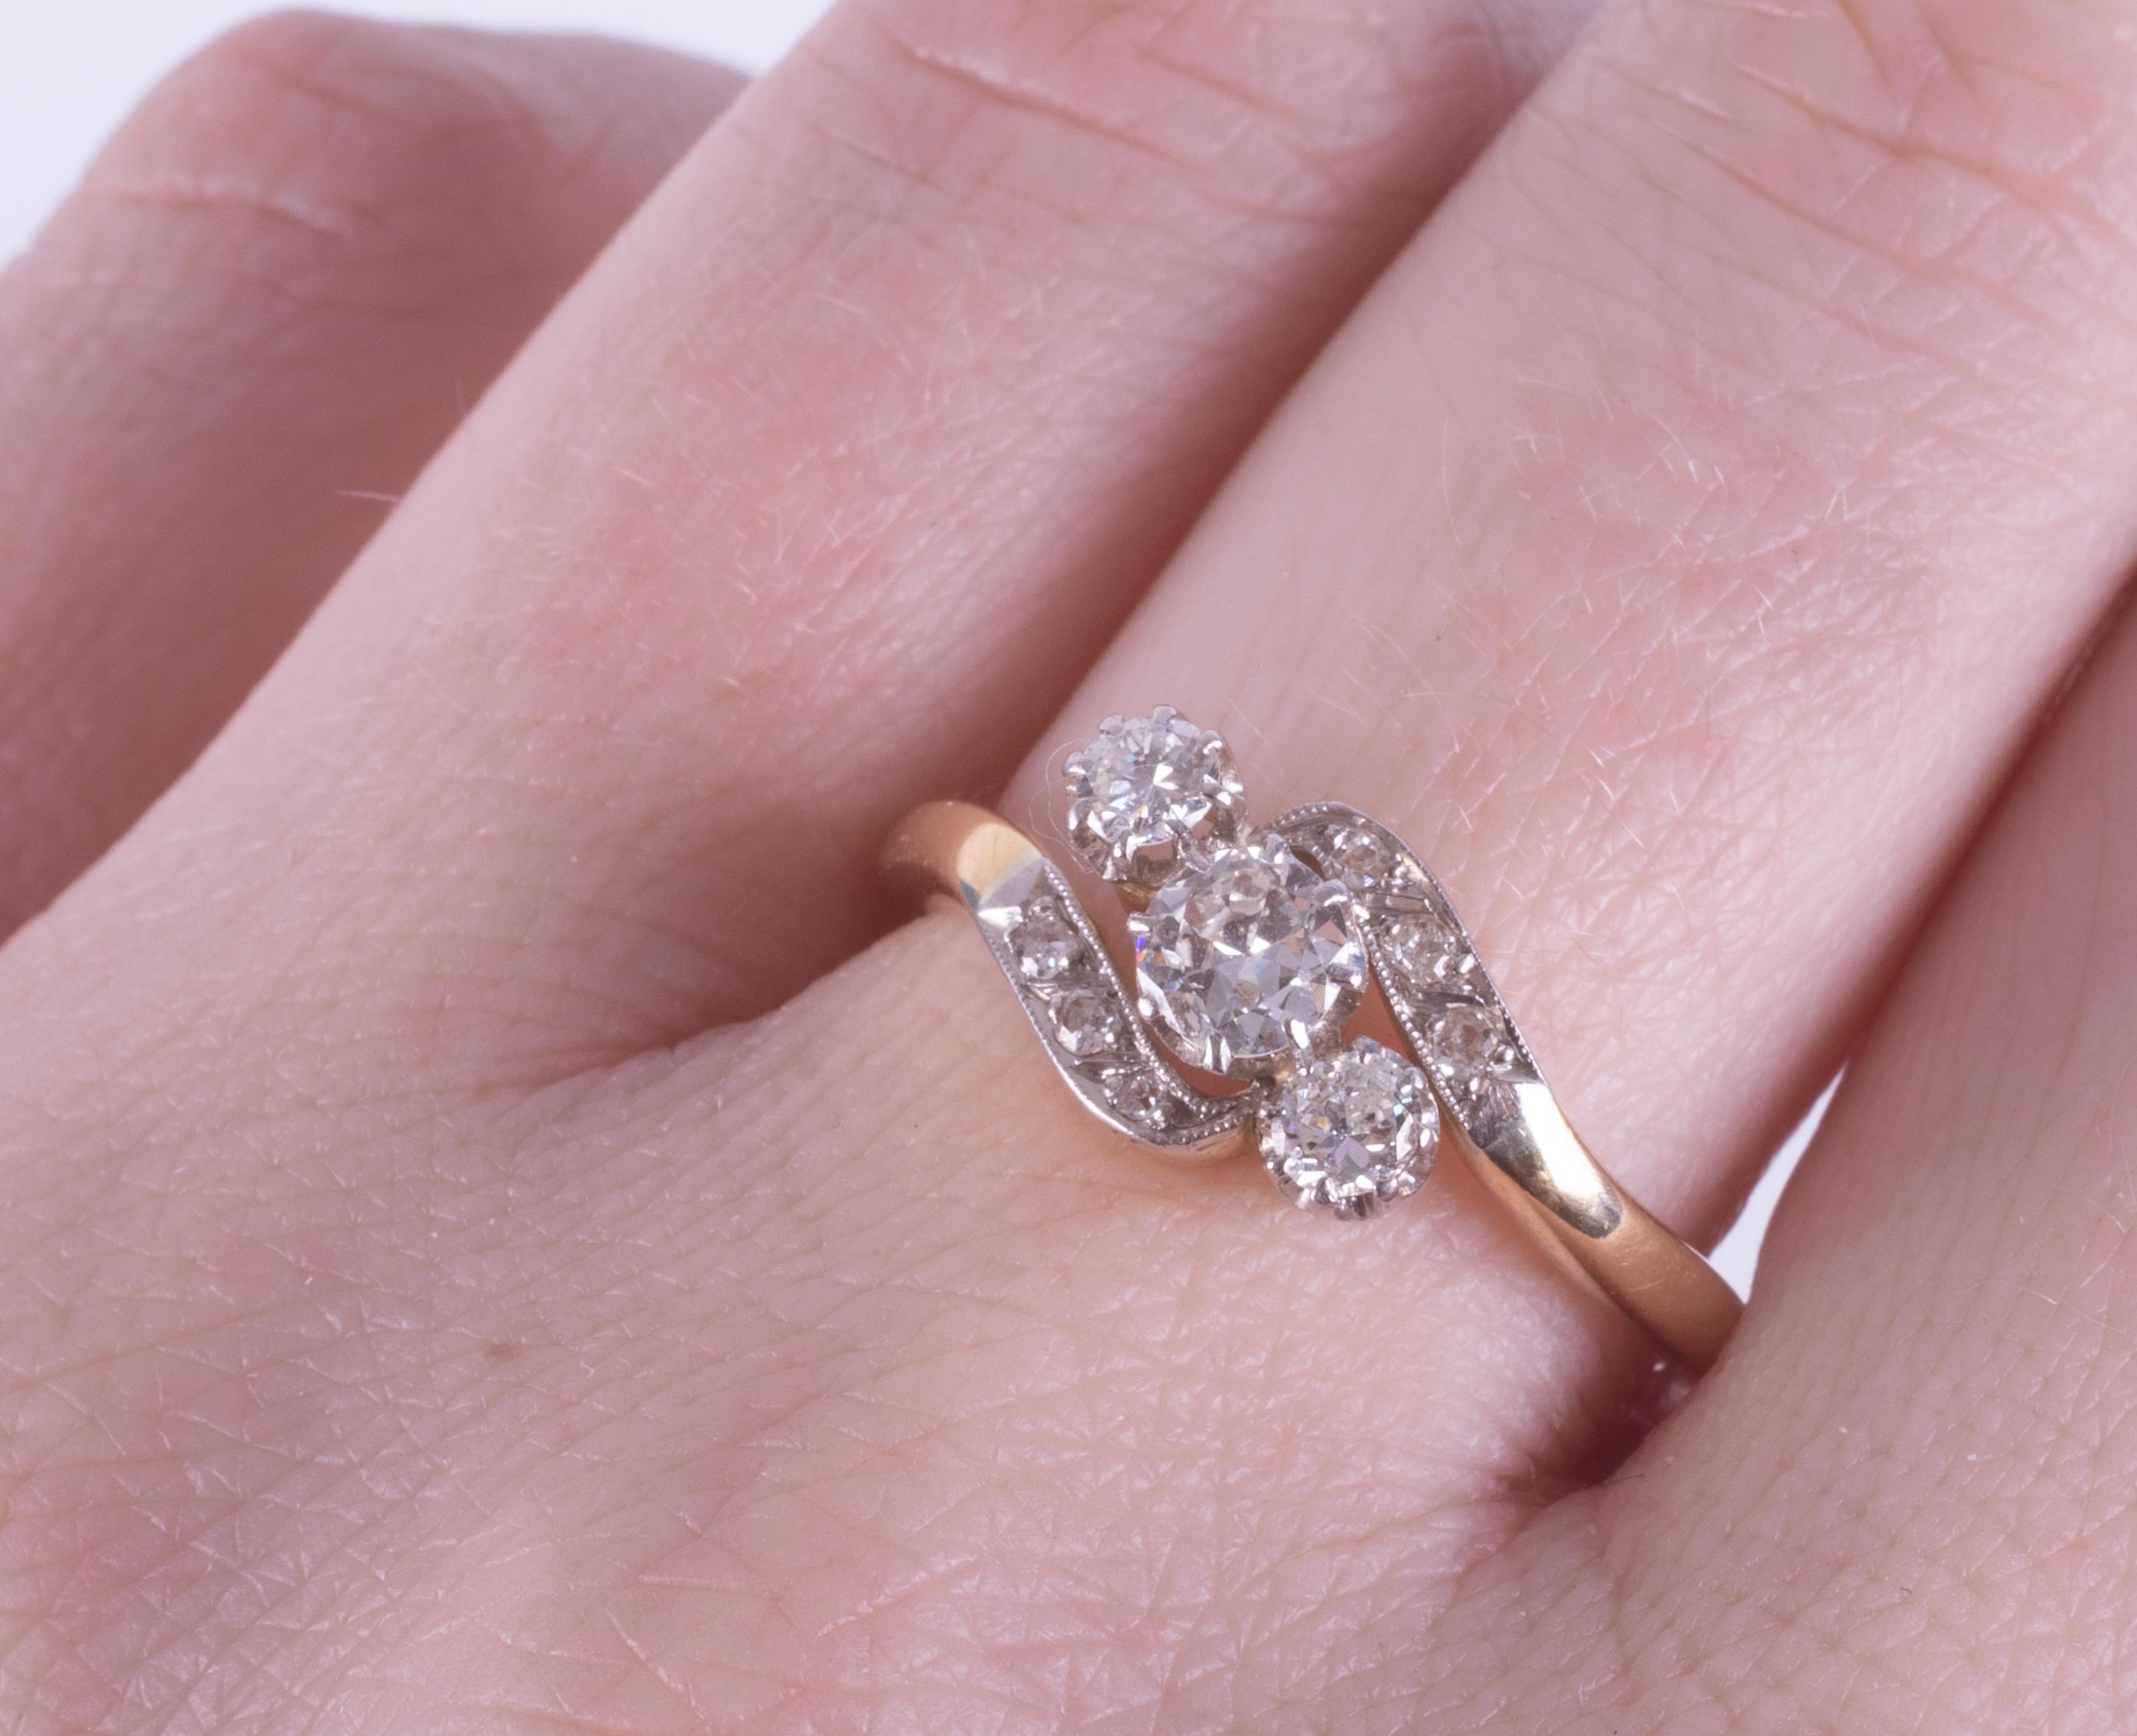 An 18ct yellow gold & platinum crossover style ring set with three round brilliant cut diamonds - Image 2 of 2